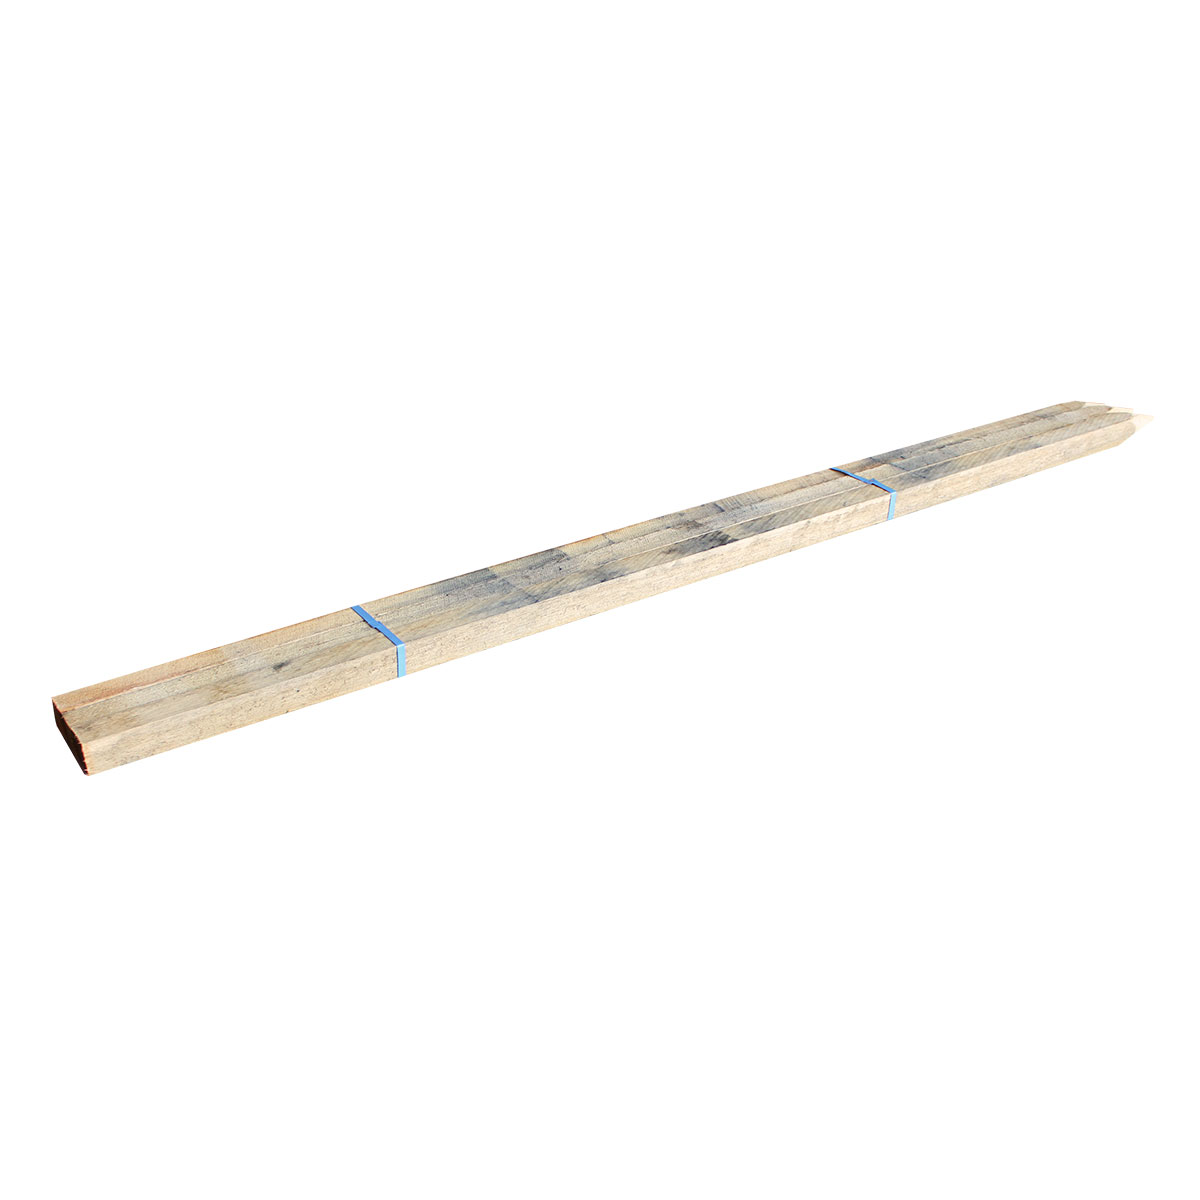 Hardwood Stakes 50 x 50 x 2400mm - 3 Pack